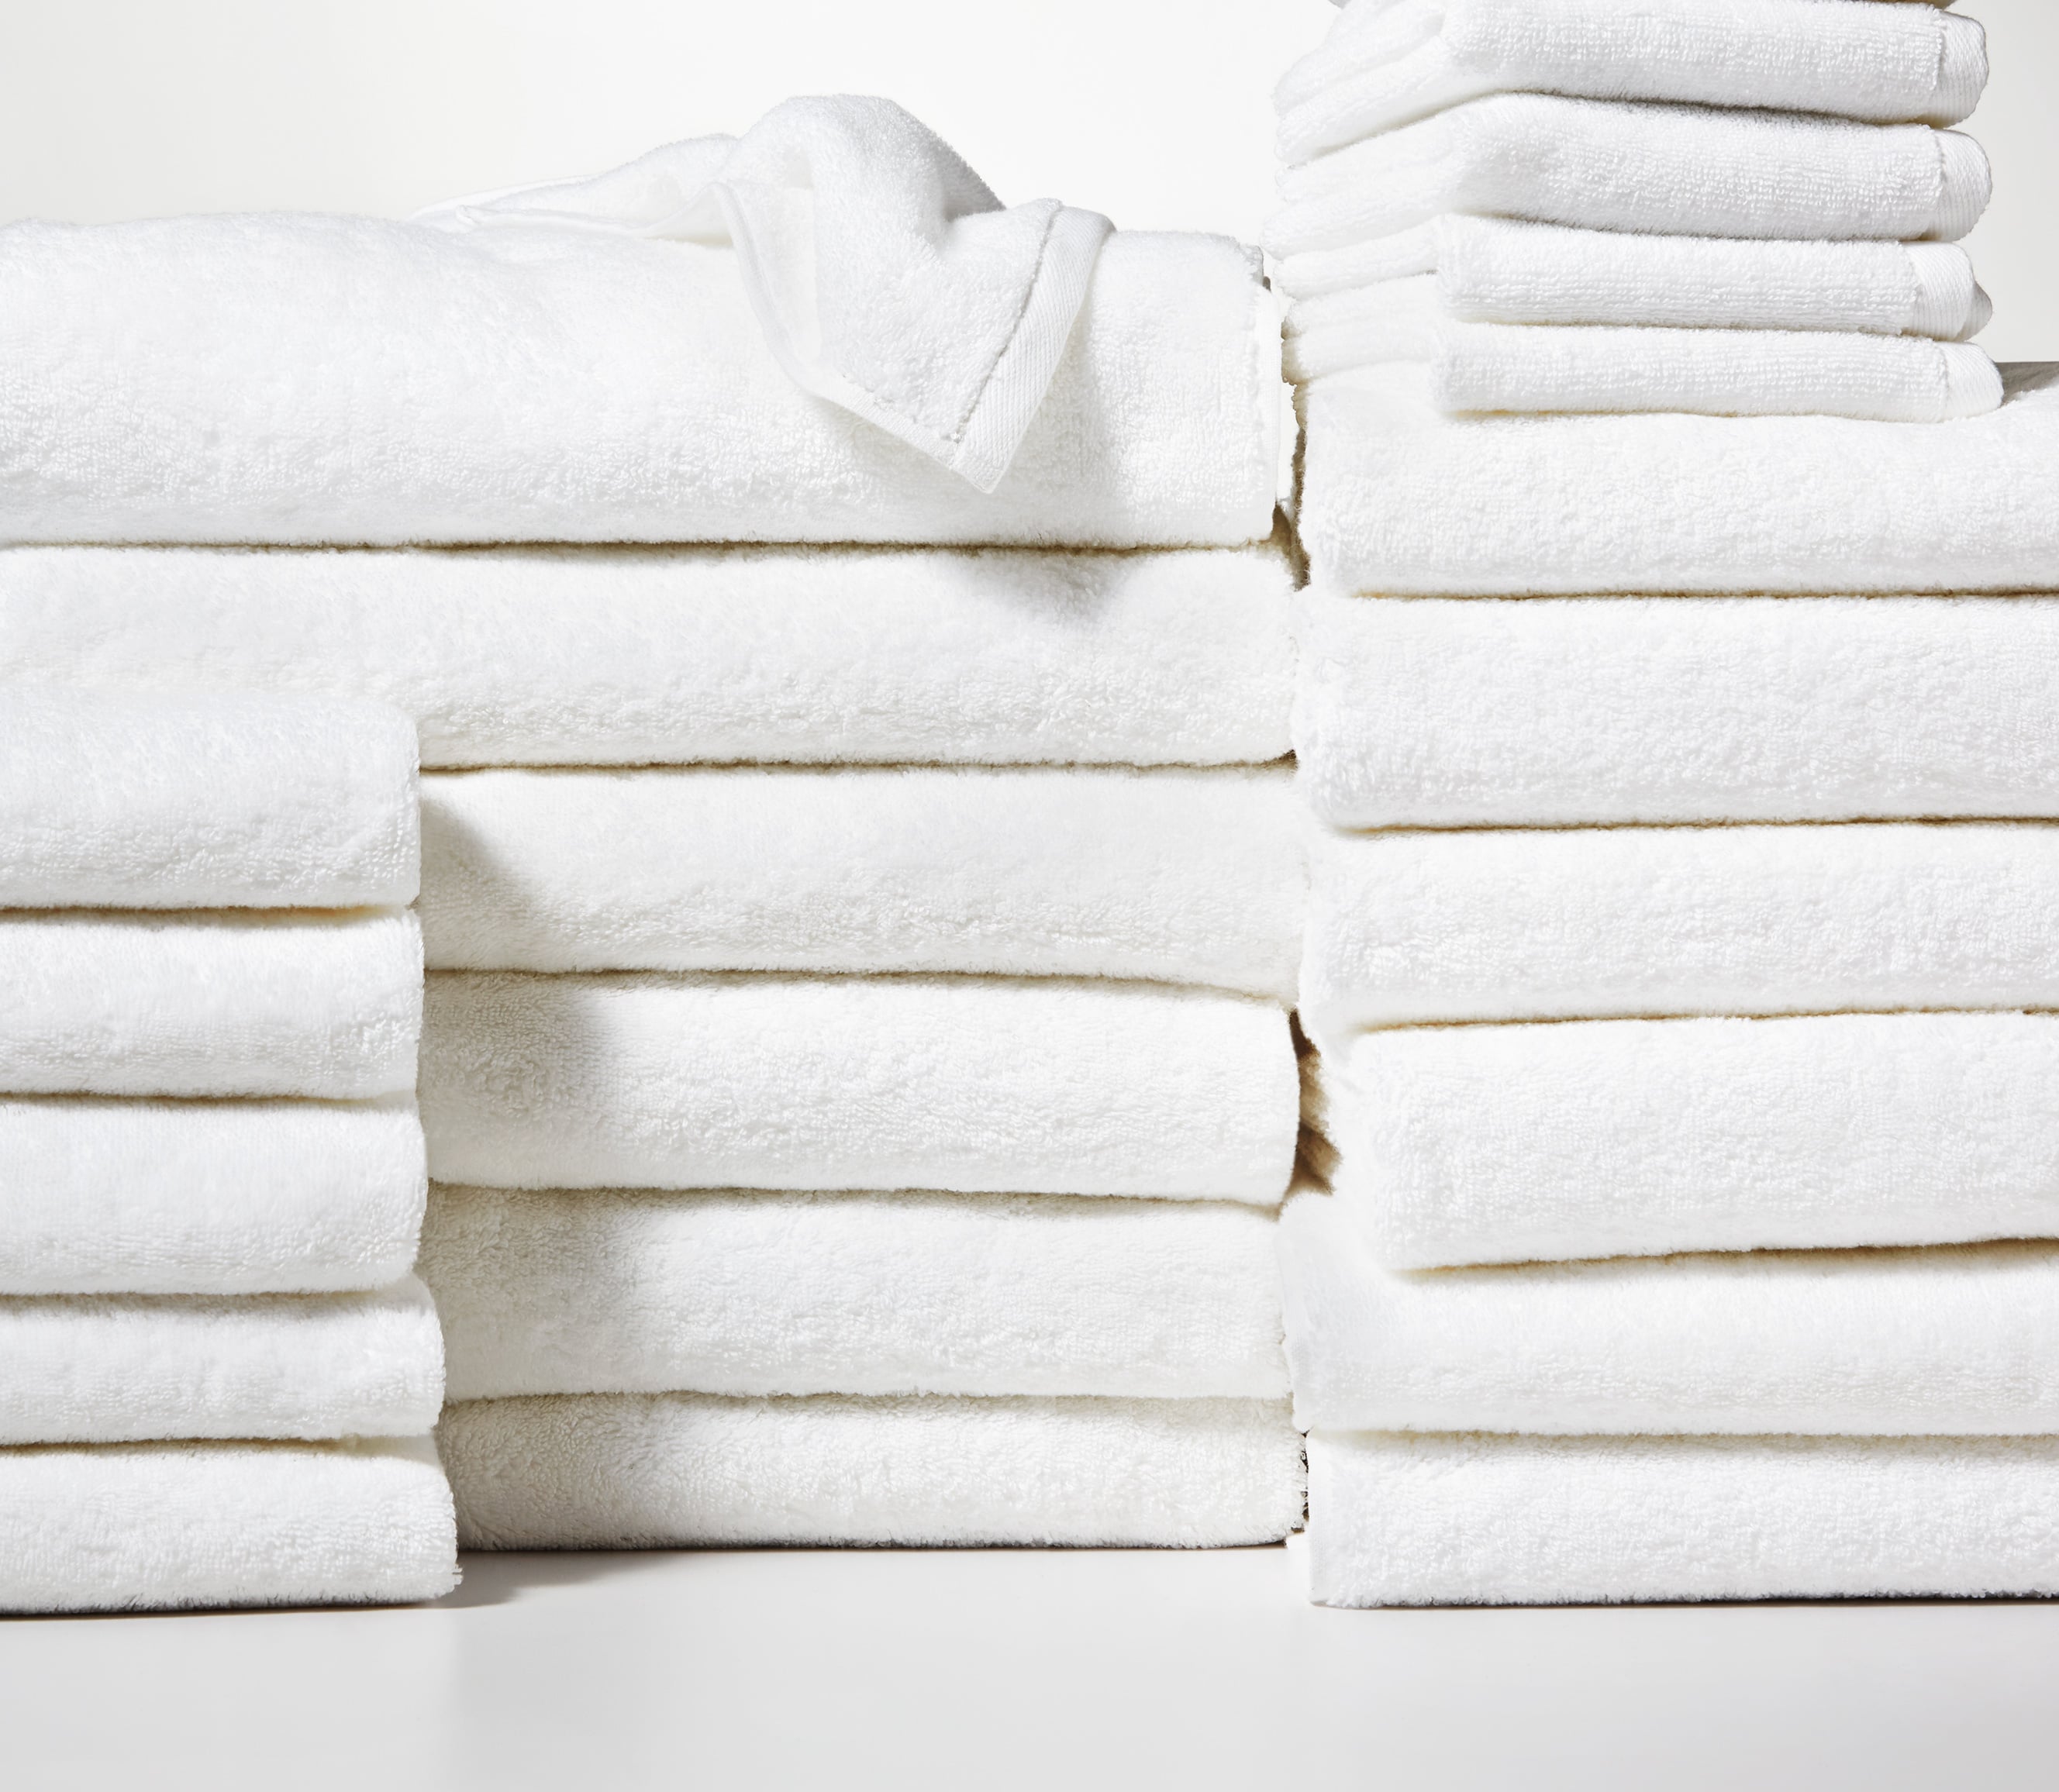 How to Keep White Towels White & Fluffy